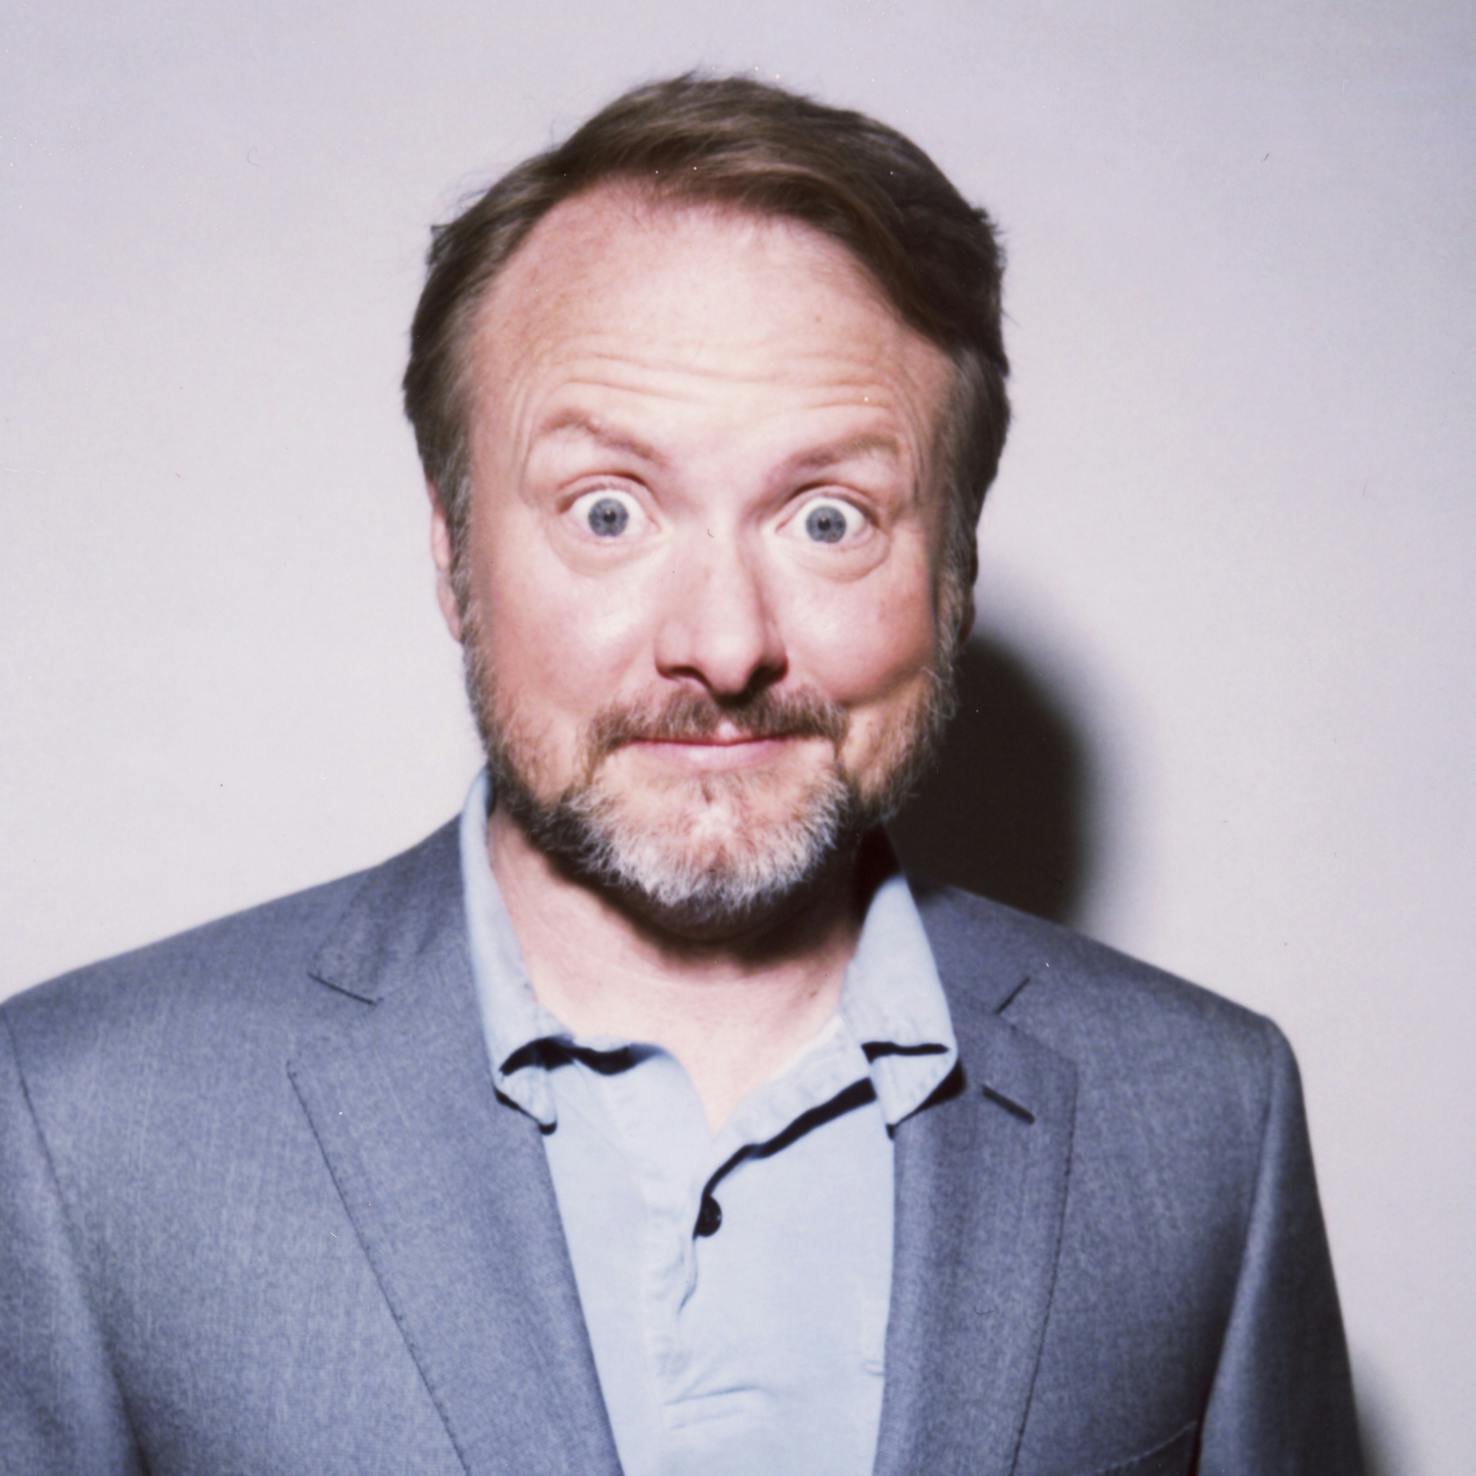 Rian Johnson wears a grey polo shirt and dark grey blazer and makes a silly face at the camera.